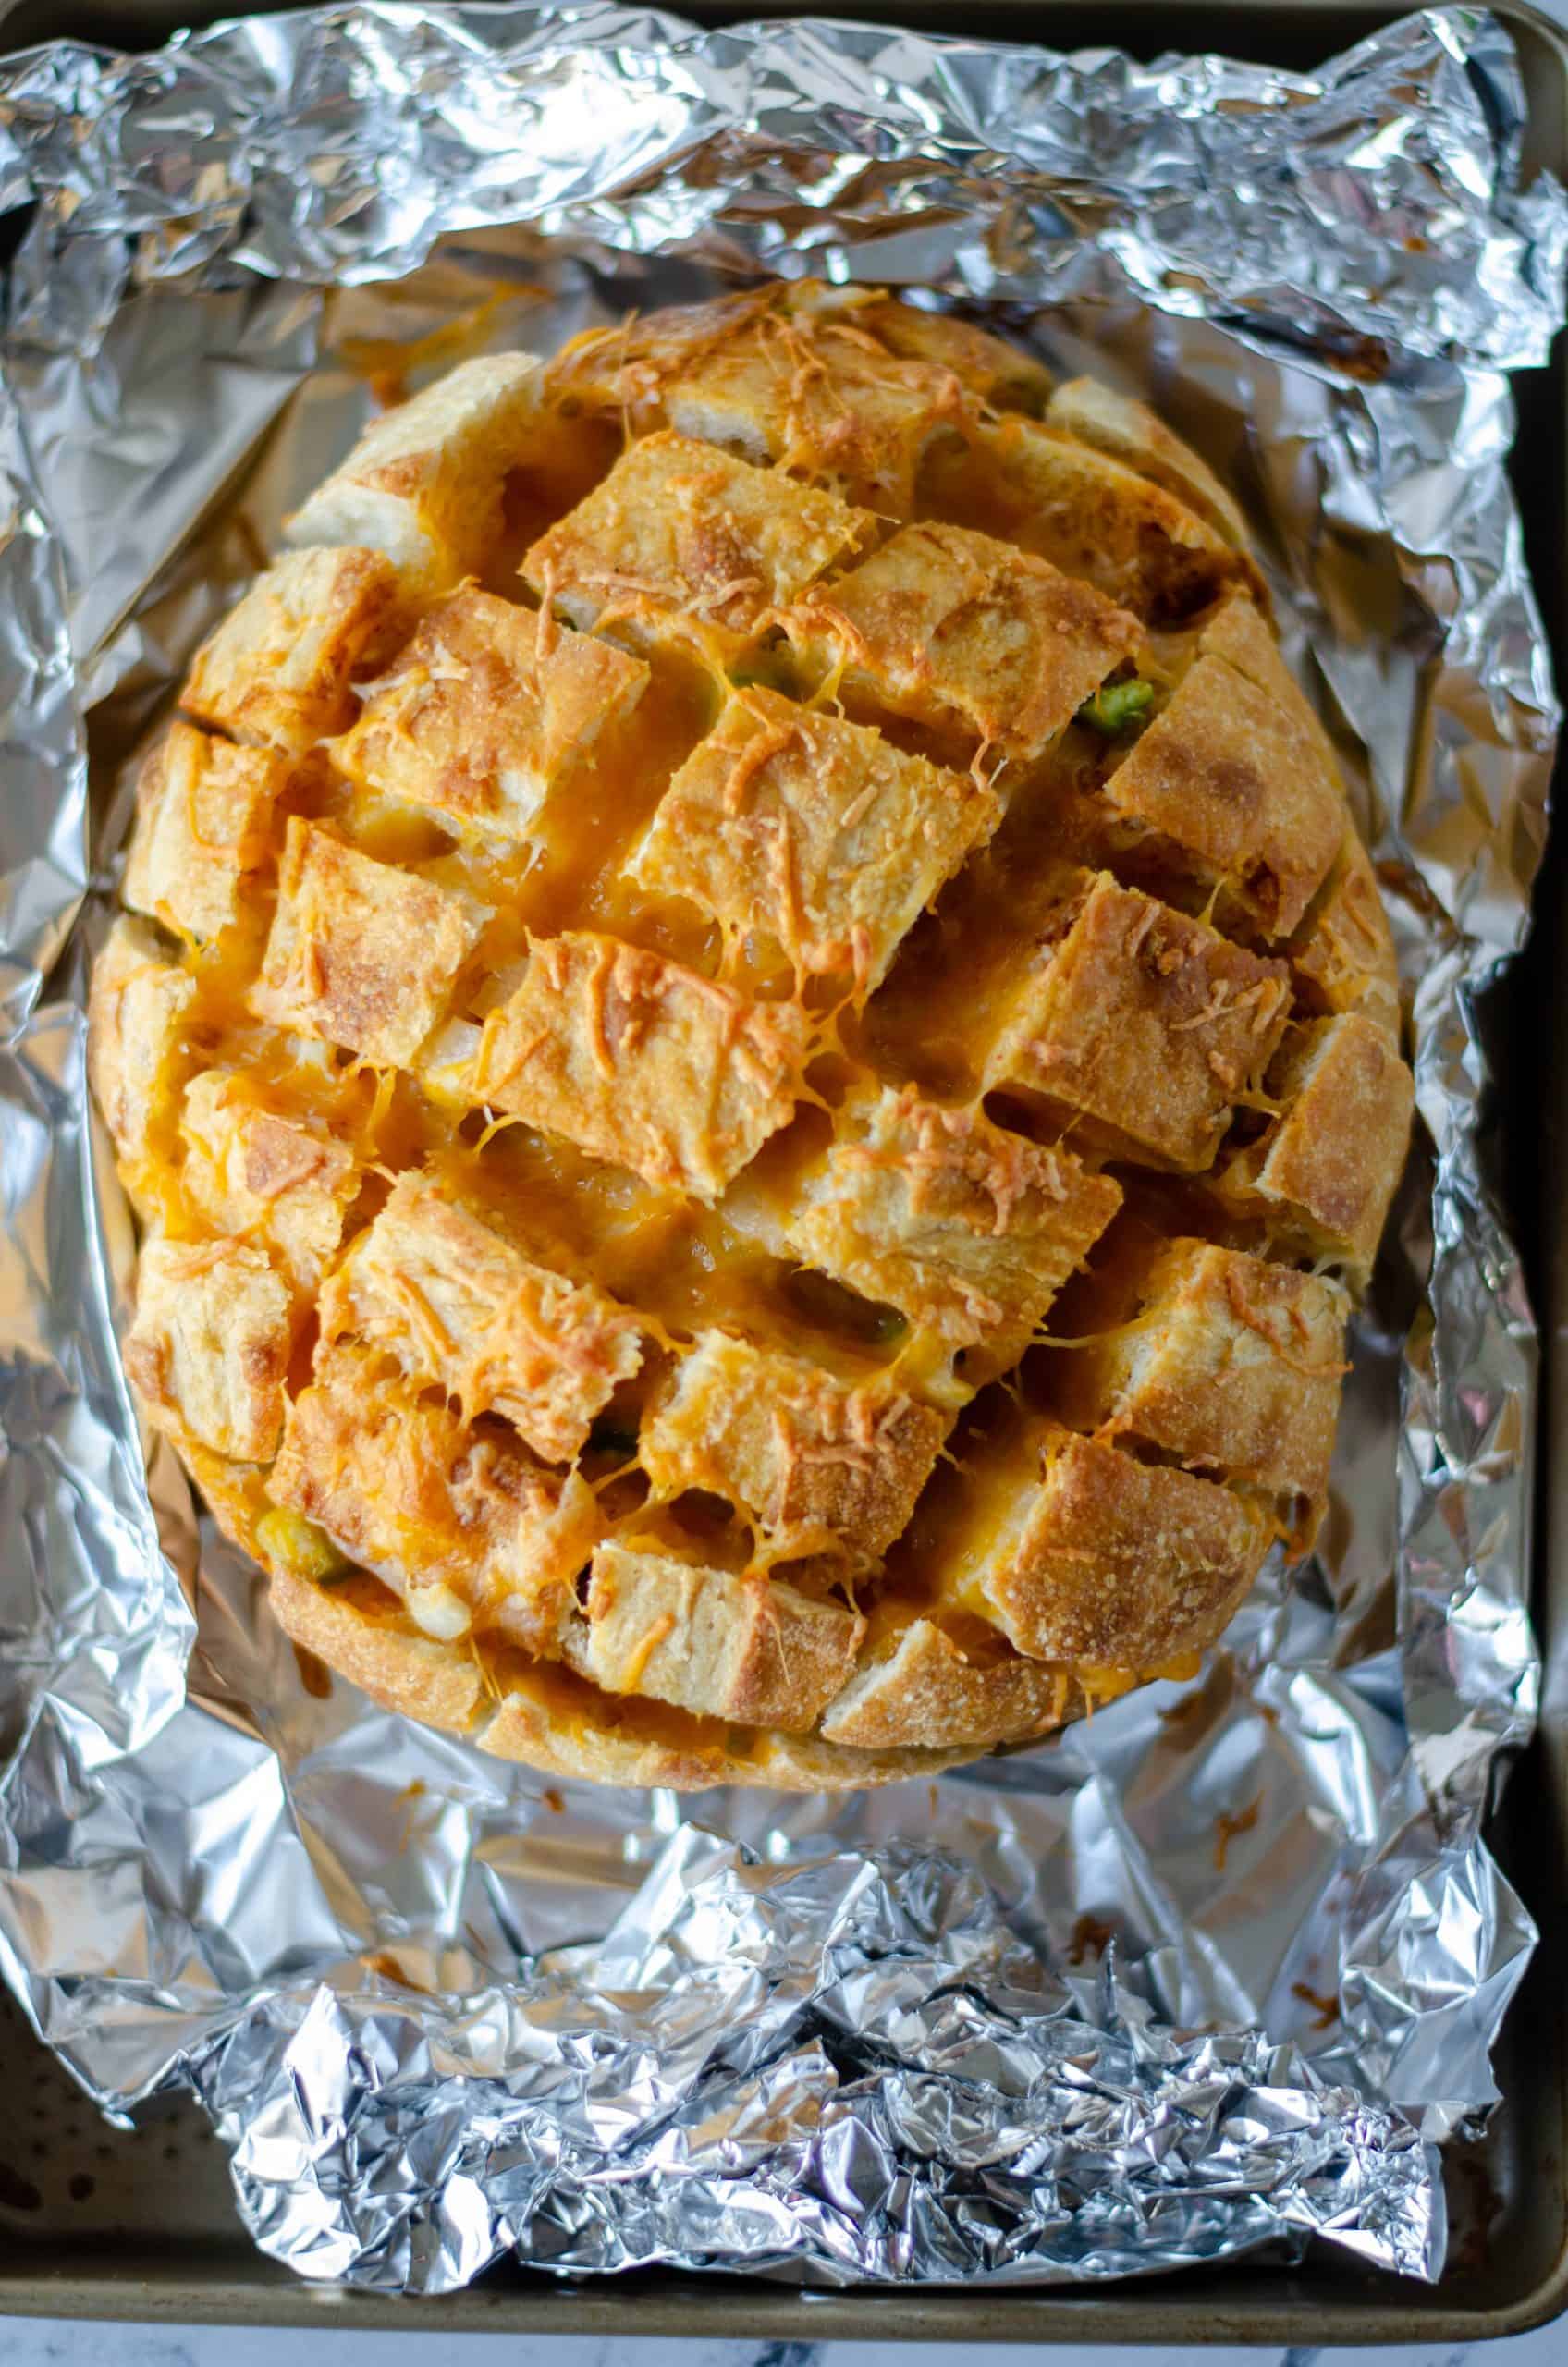 Finished Taco Pull apart bread in foil showing melted cheese in cut portions of loaf.